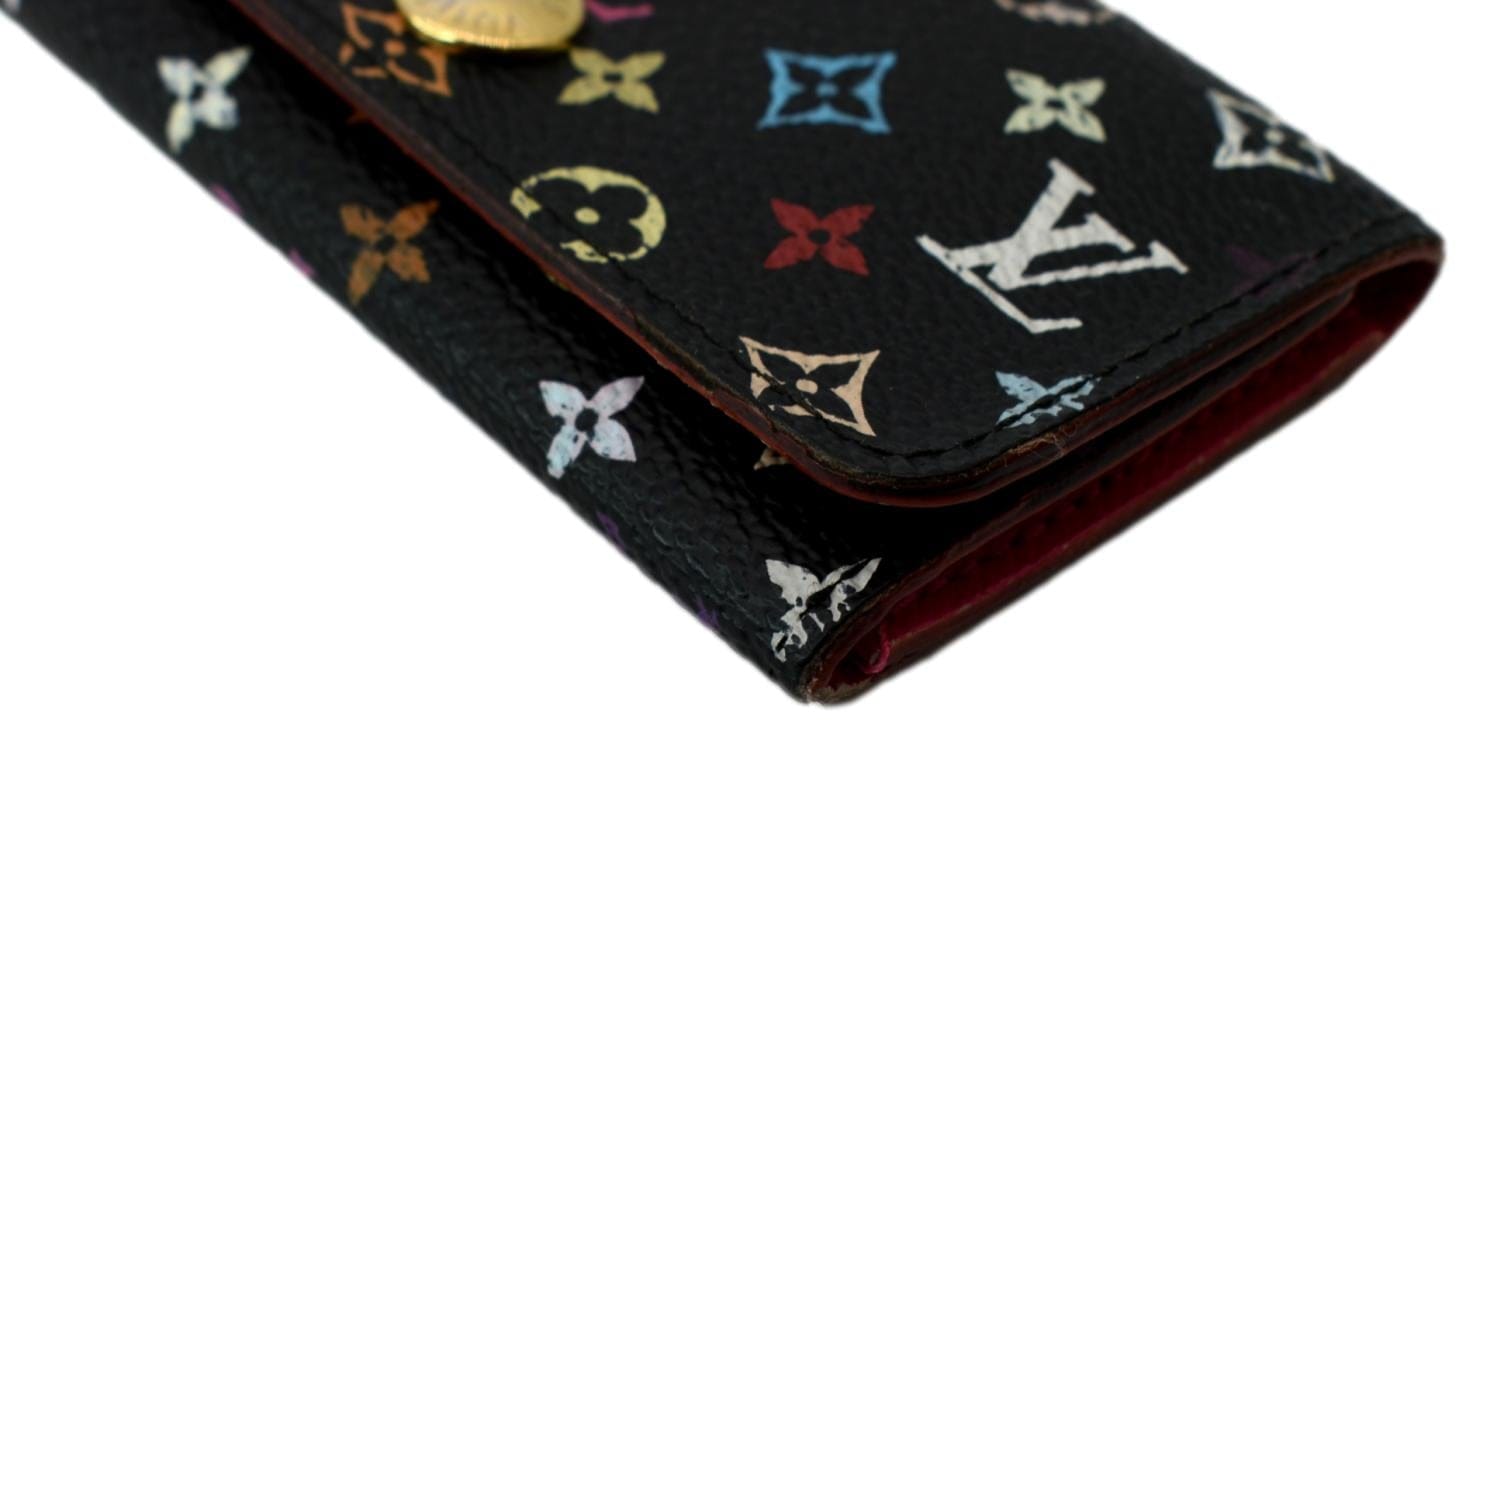 4 Key Holder Monogram Canvas - Wallets and Small Leather Goods